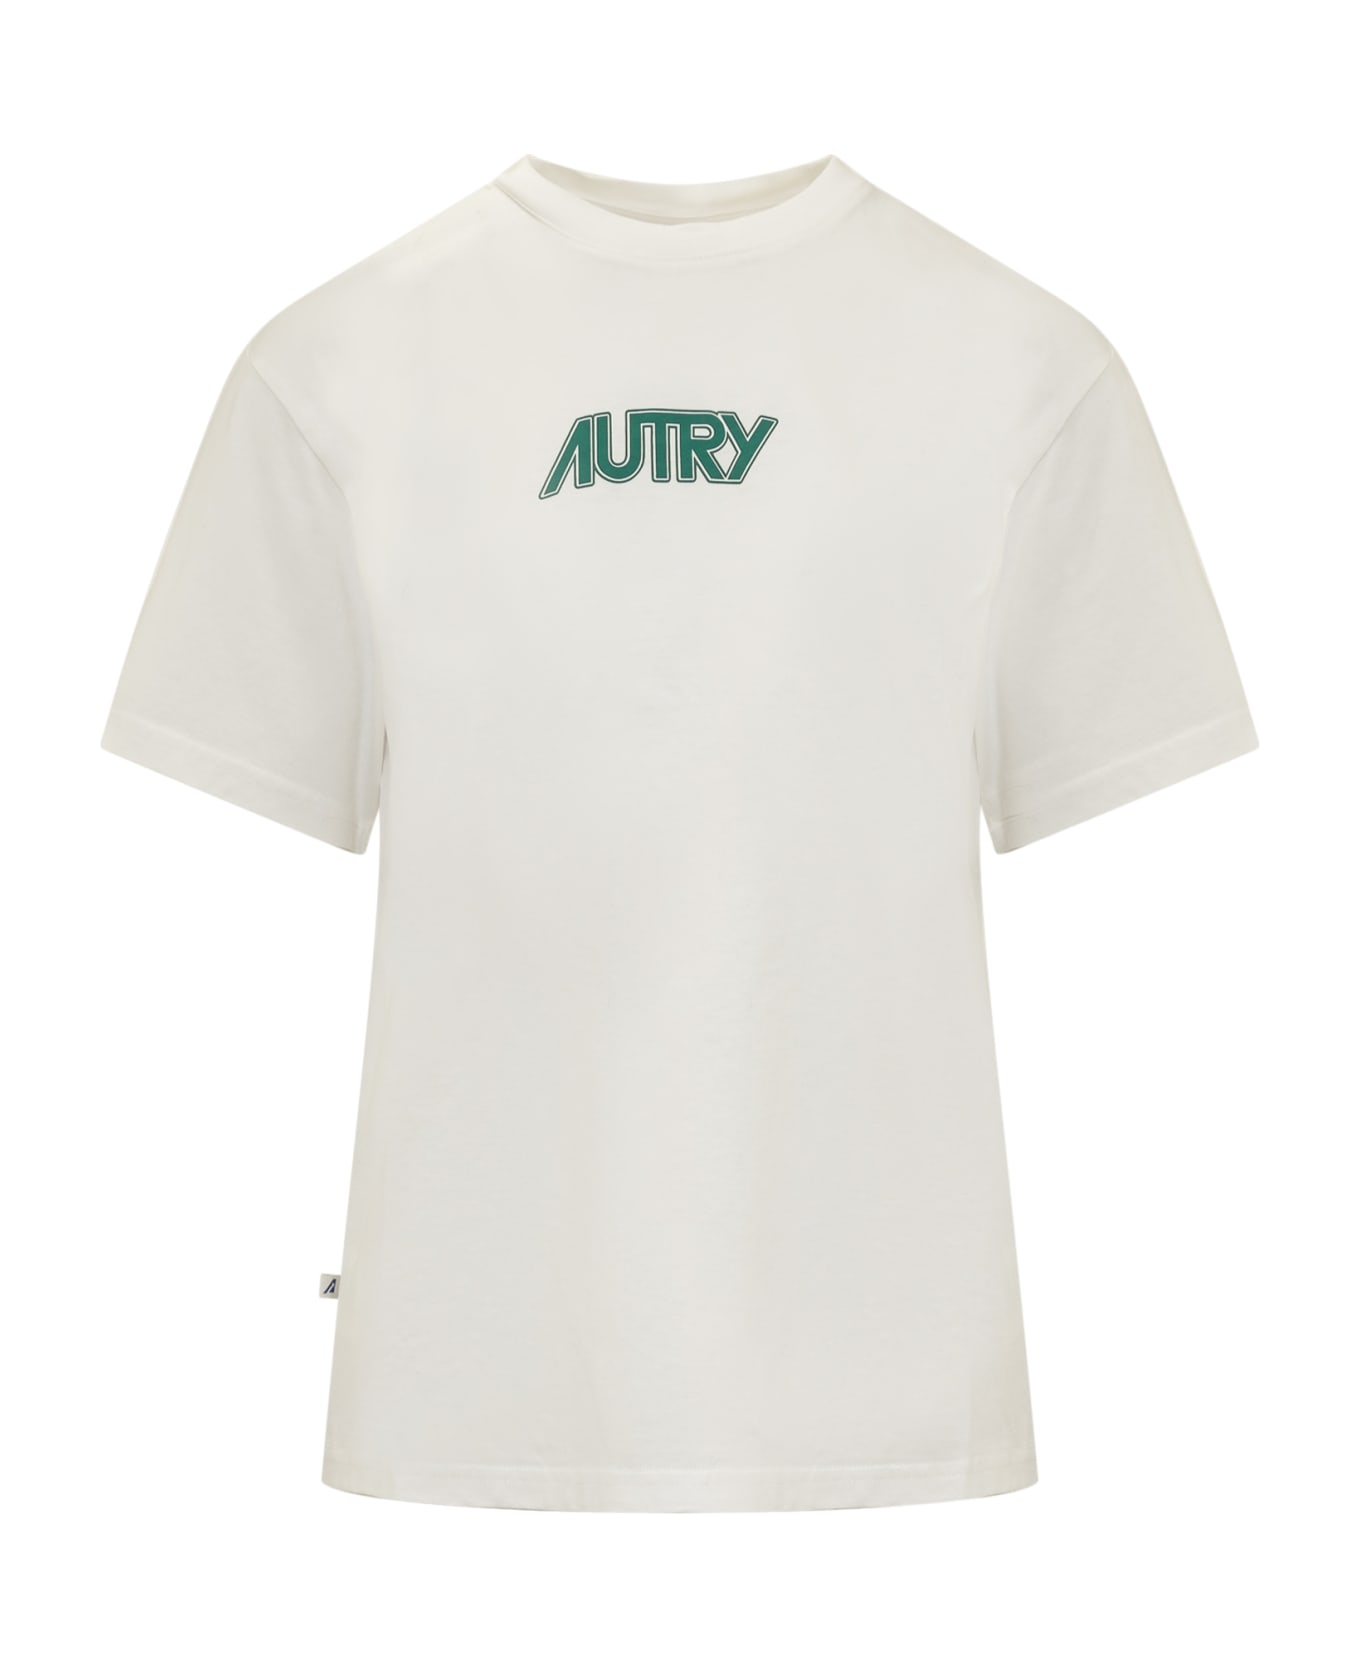 Autry T-shirt With Printed Logo - APPAREL WHITE